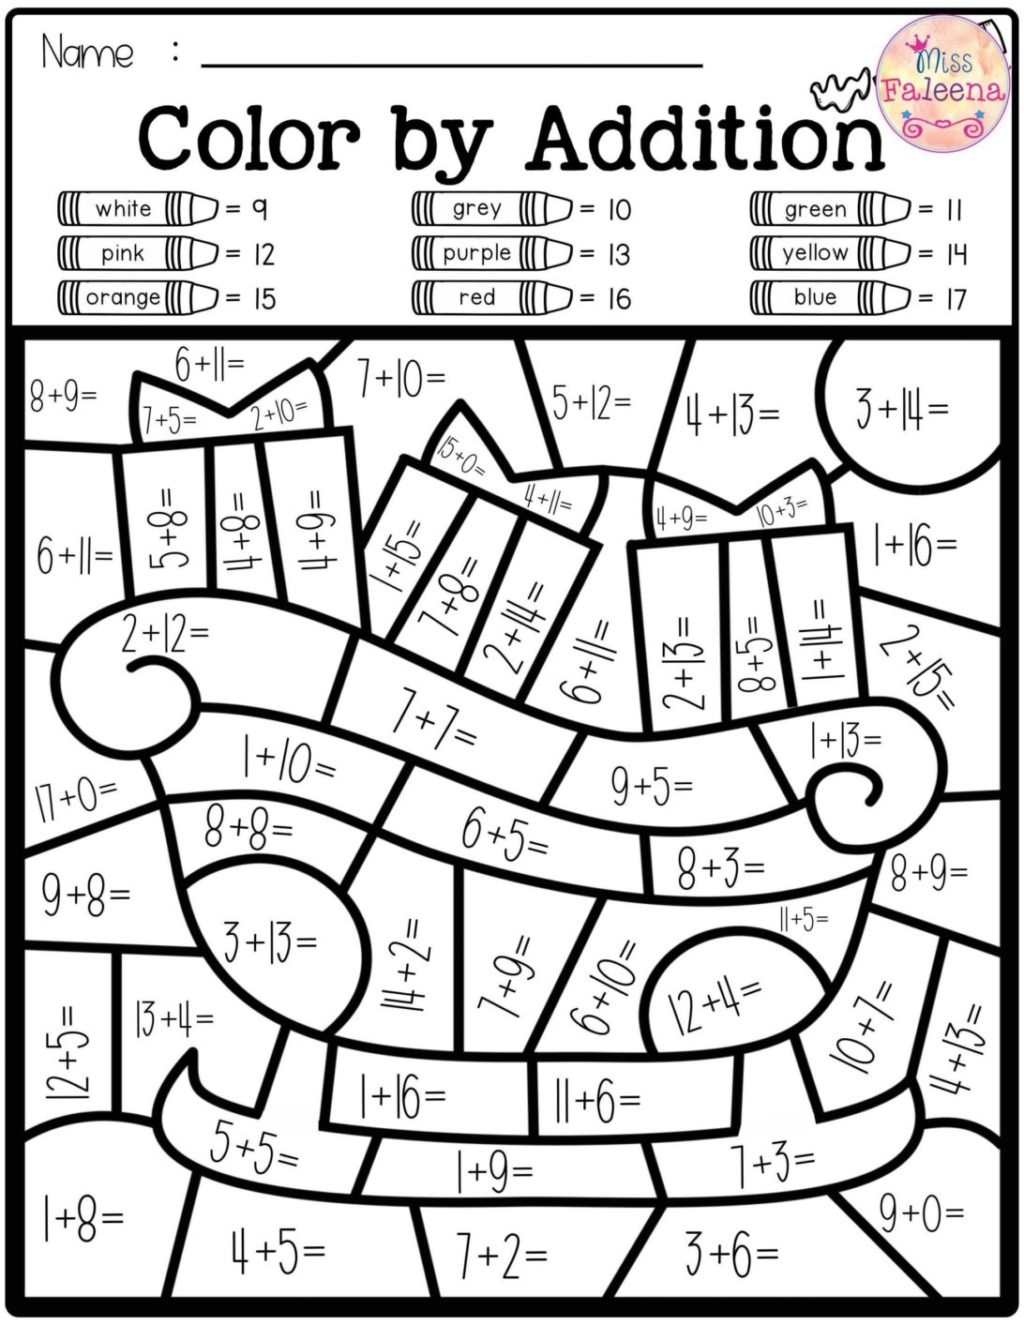 double-digit-multiplication-black-and-education